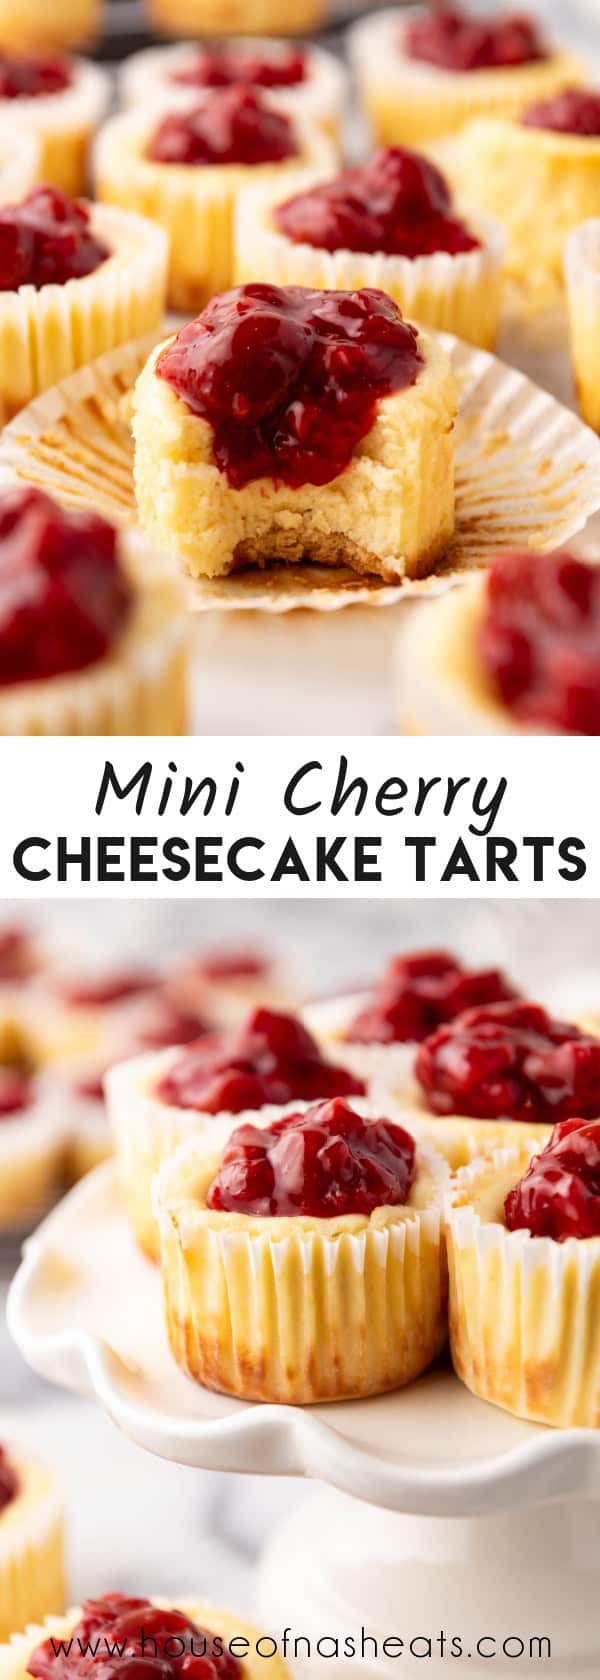 A collage of images of cherry cheesecake tarts with text overlay.